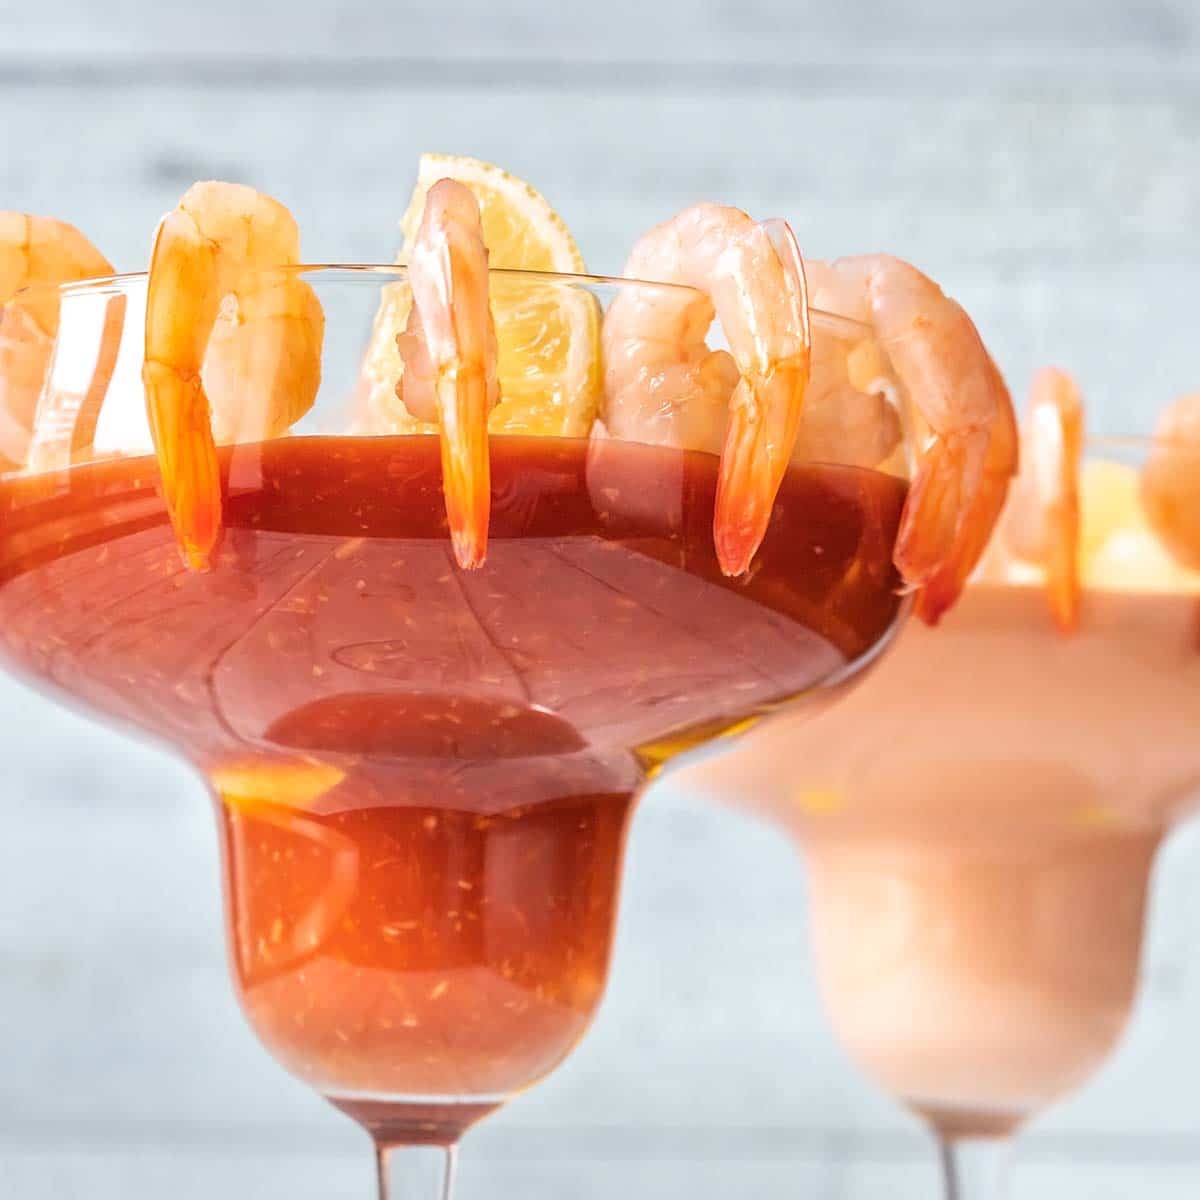 The cocktail sauce freezes quite nicely. However, although you can freeze it for many months, it is recommended to consuming it within six months to enjoy the flavor at its best.